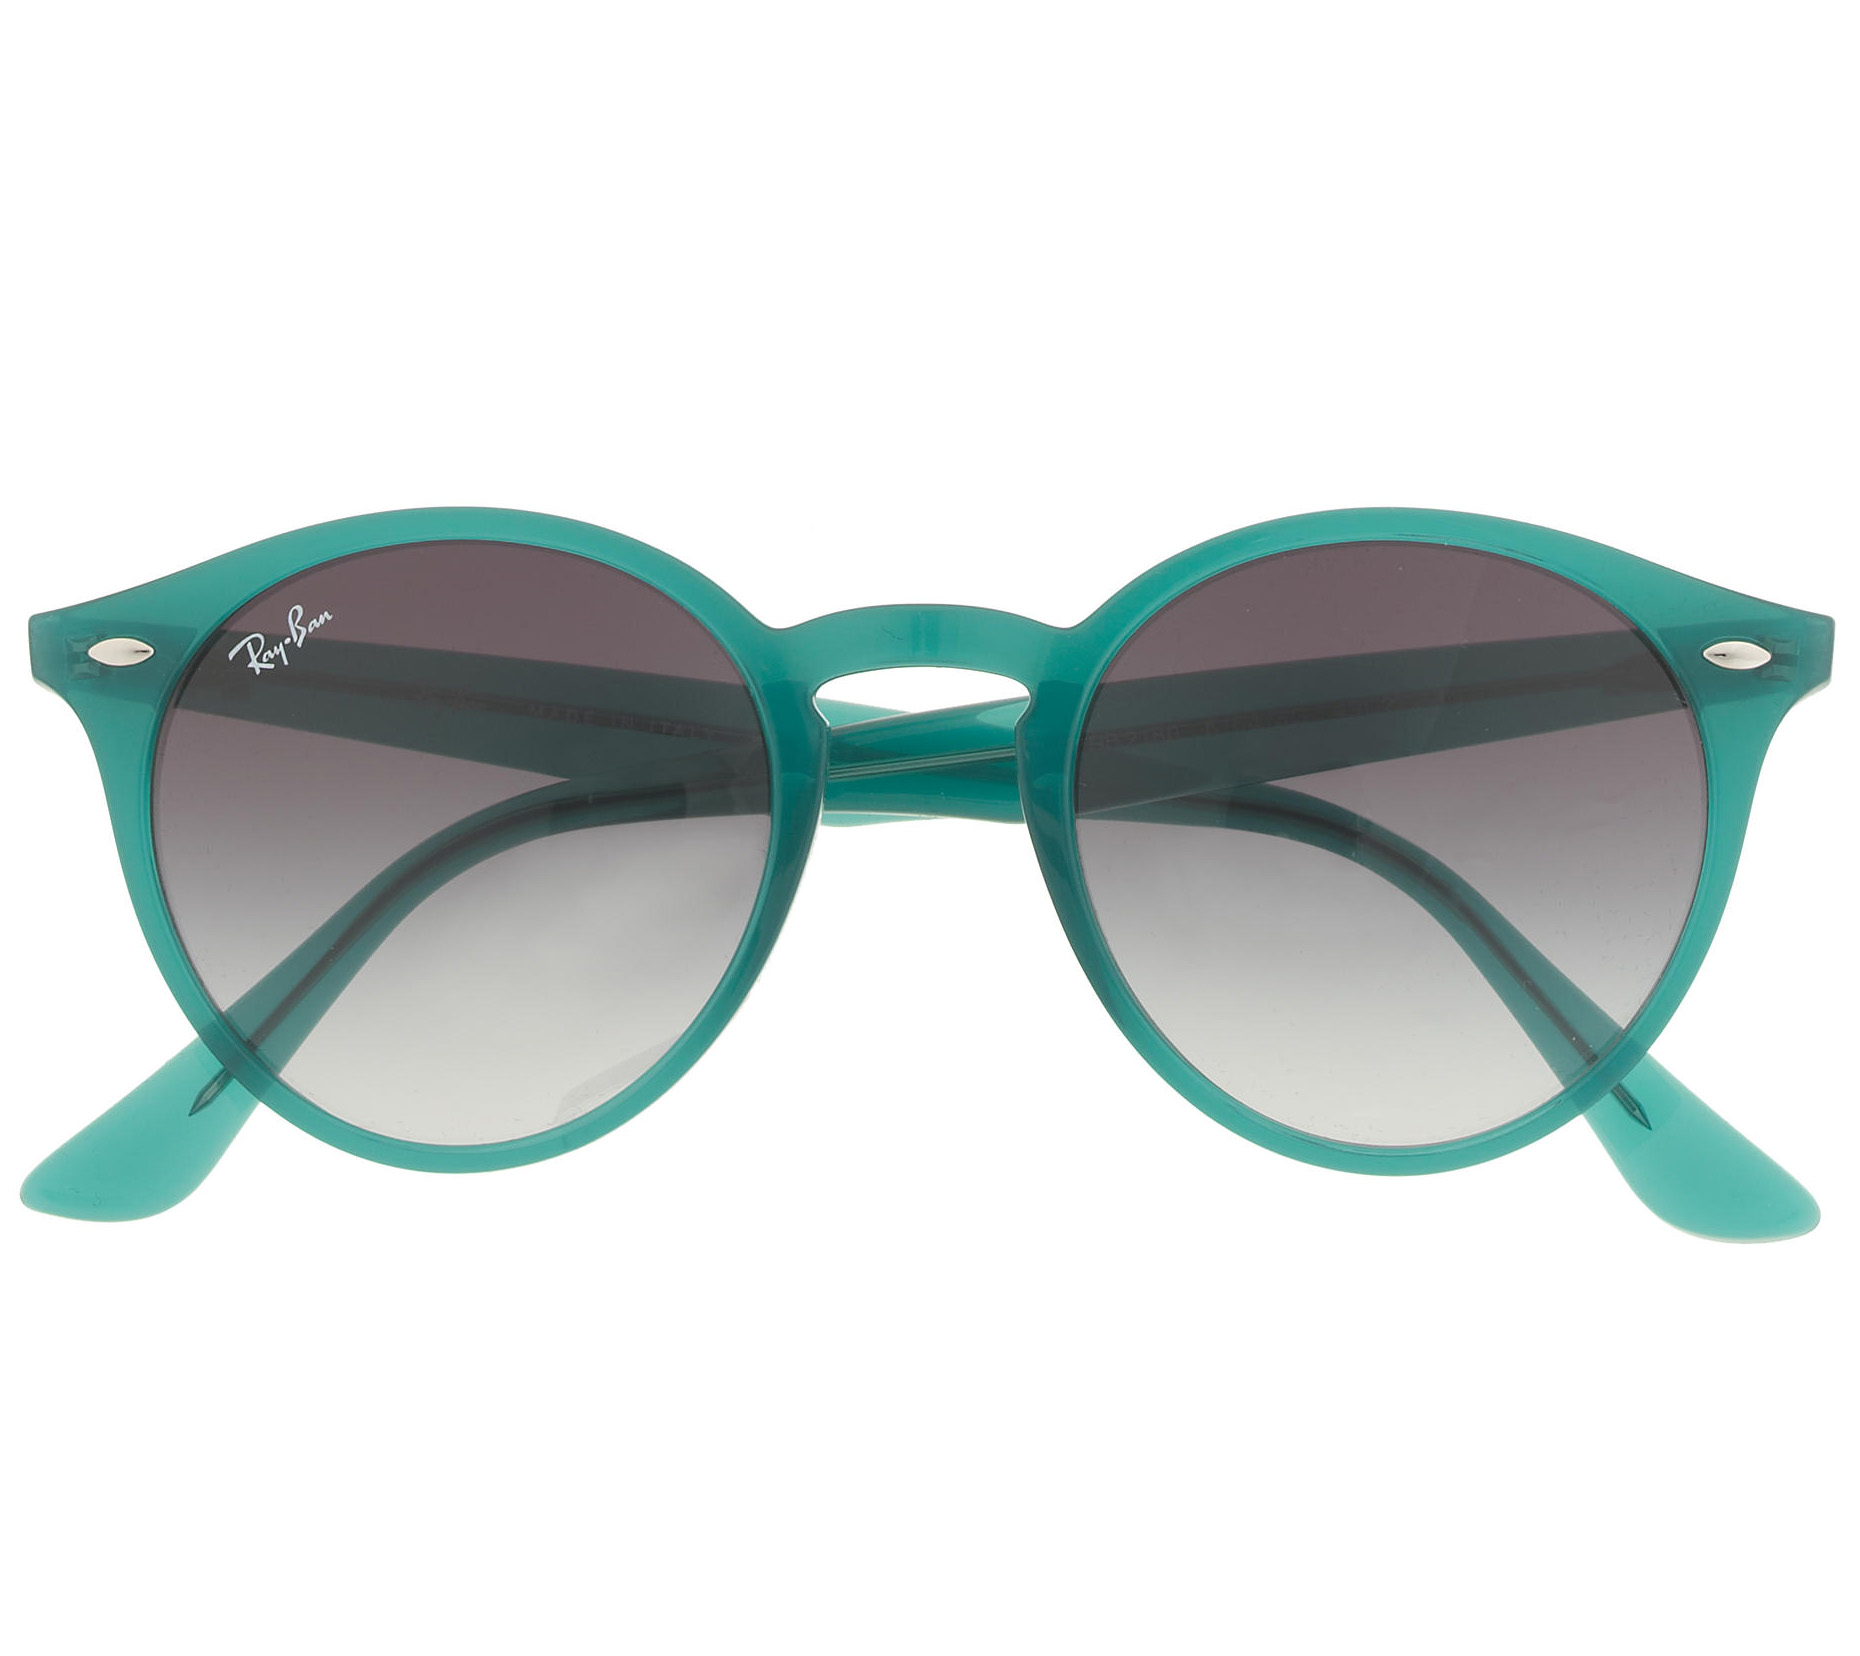 Ray-ban Turquoise High Street Round Sunglasses